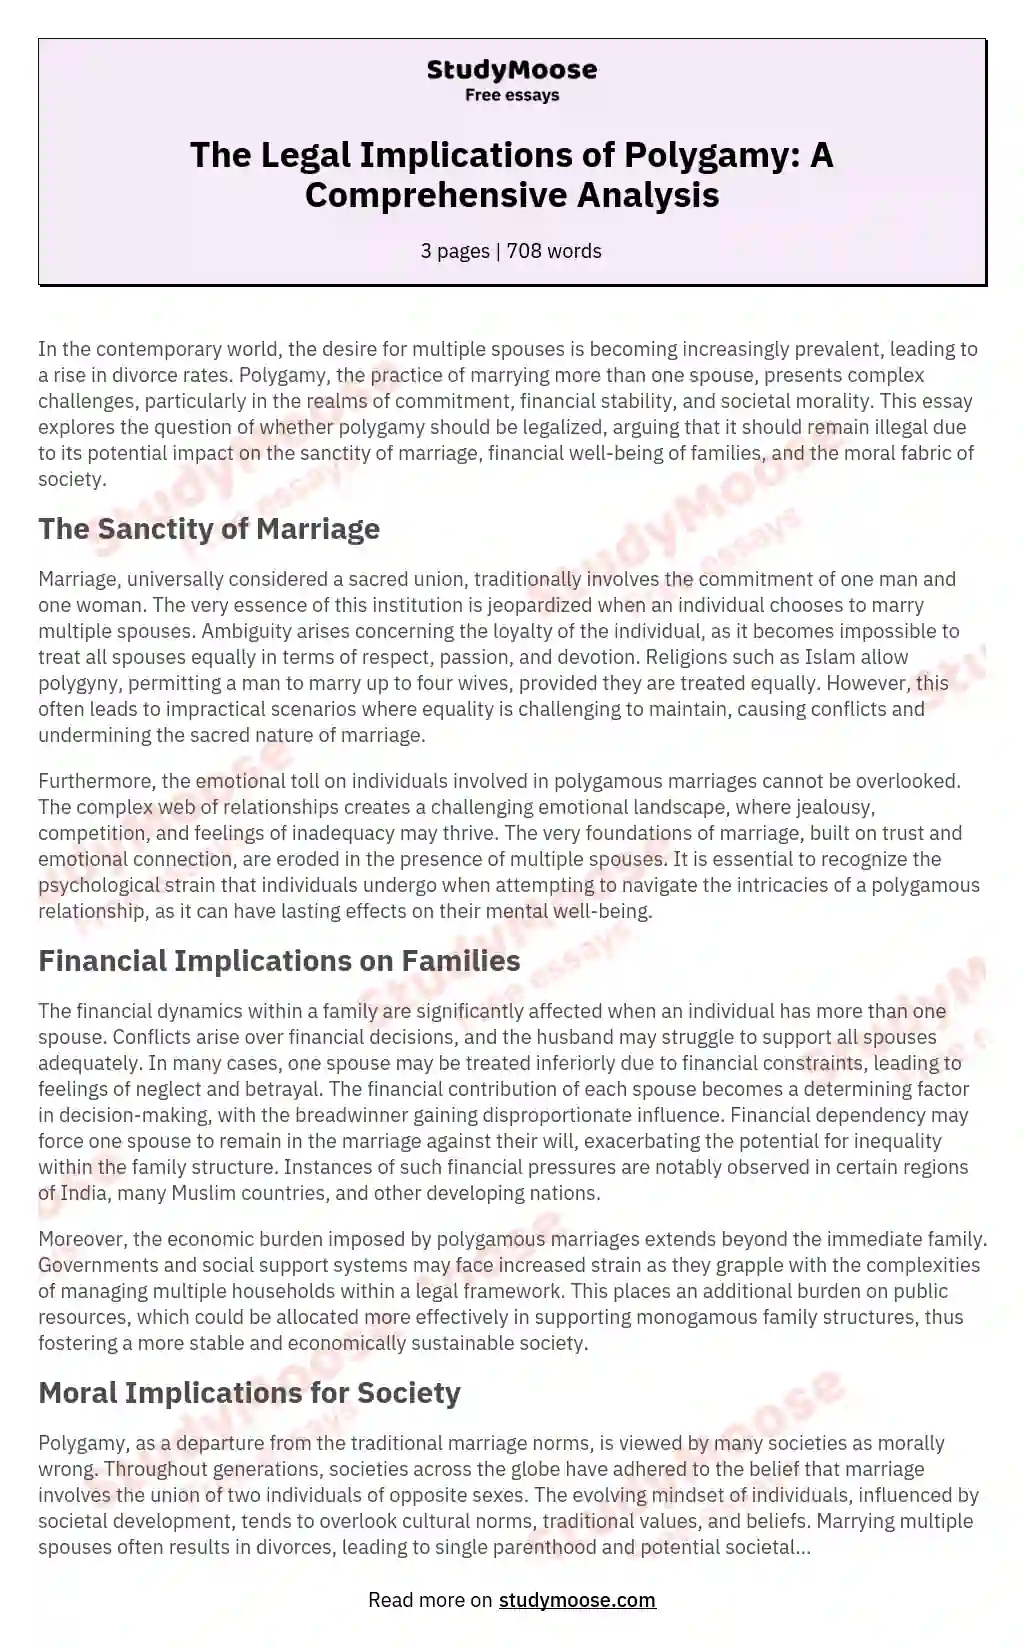 The Legal Implications of Polygamy: A Comprehensive Analysis essay